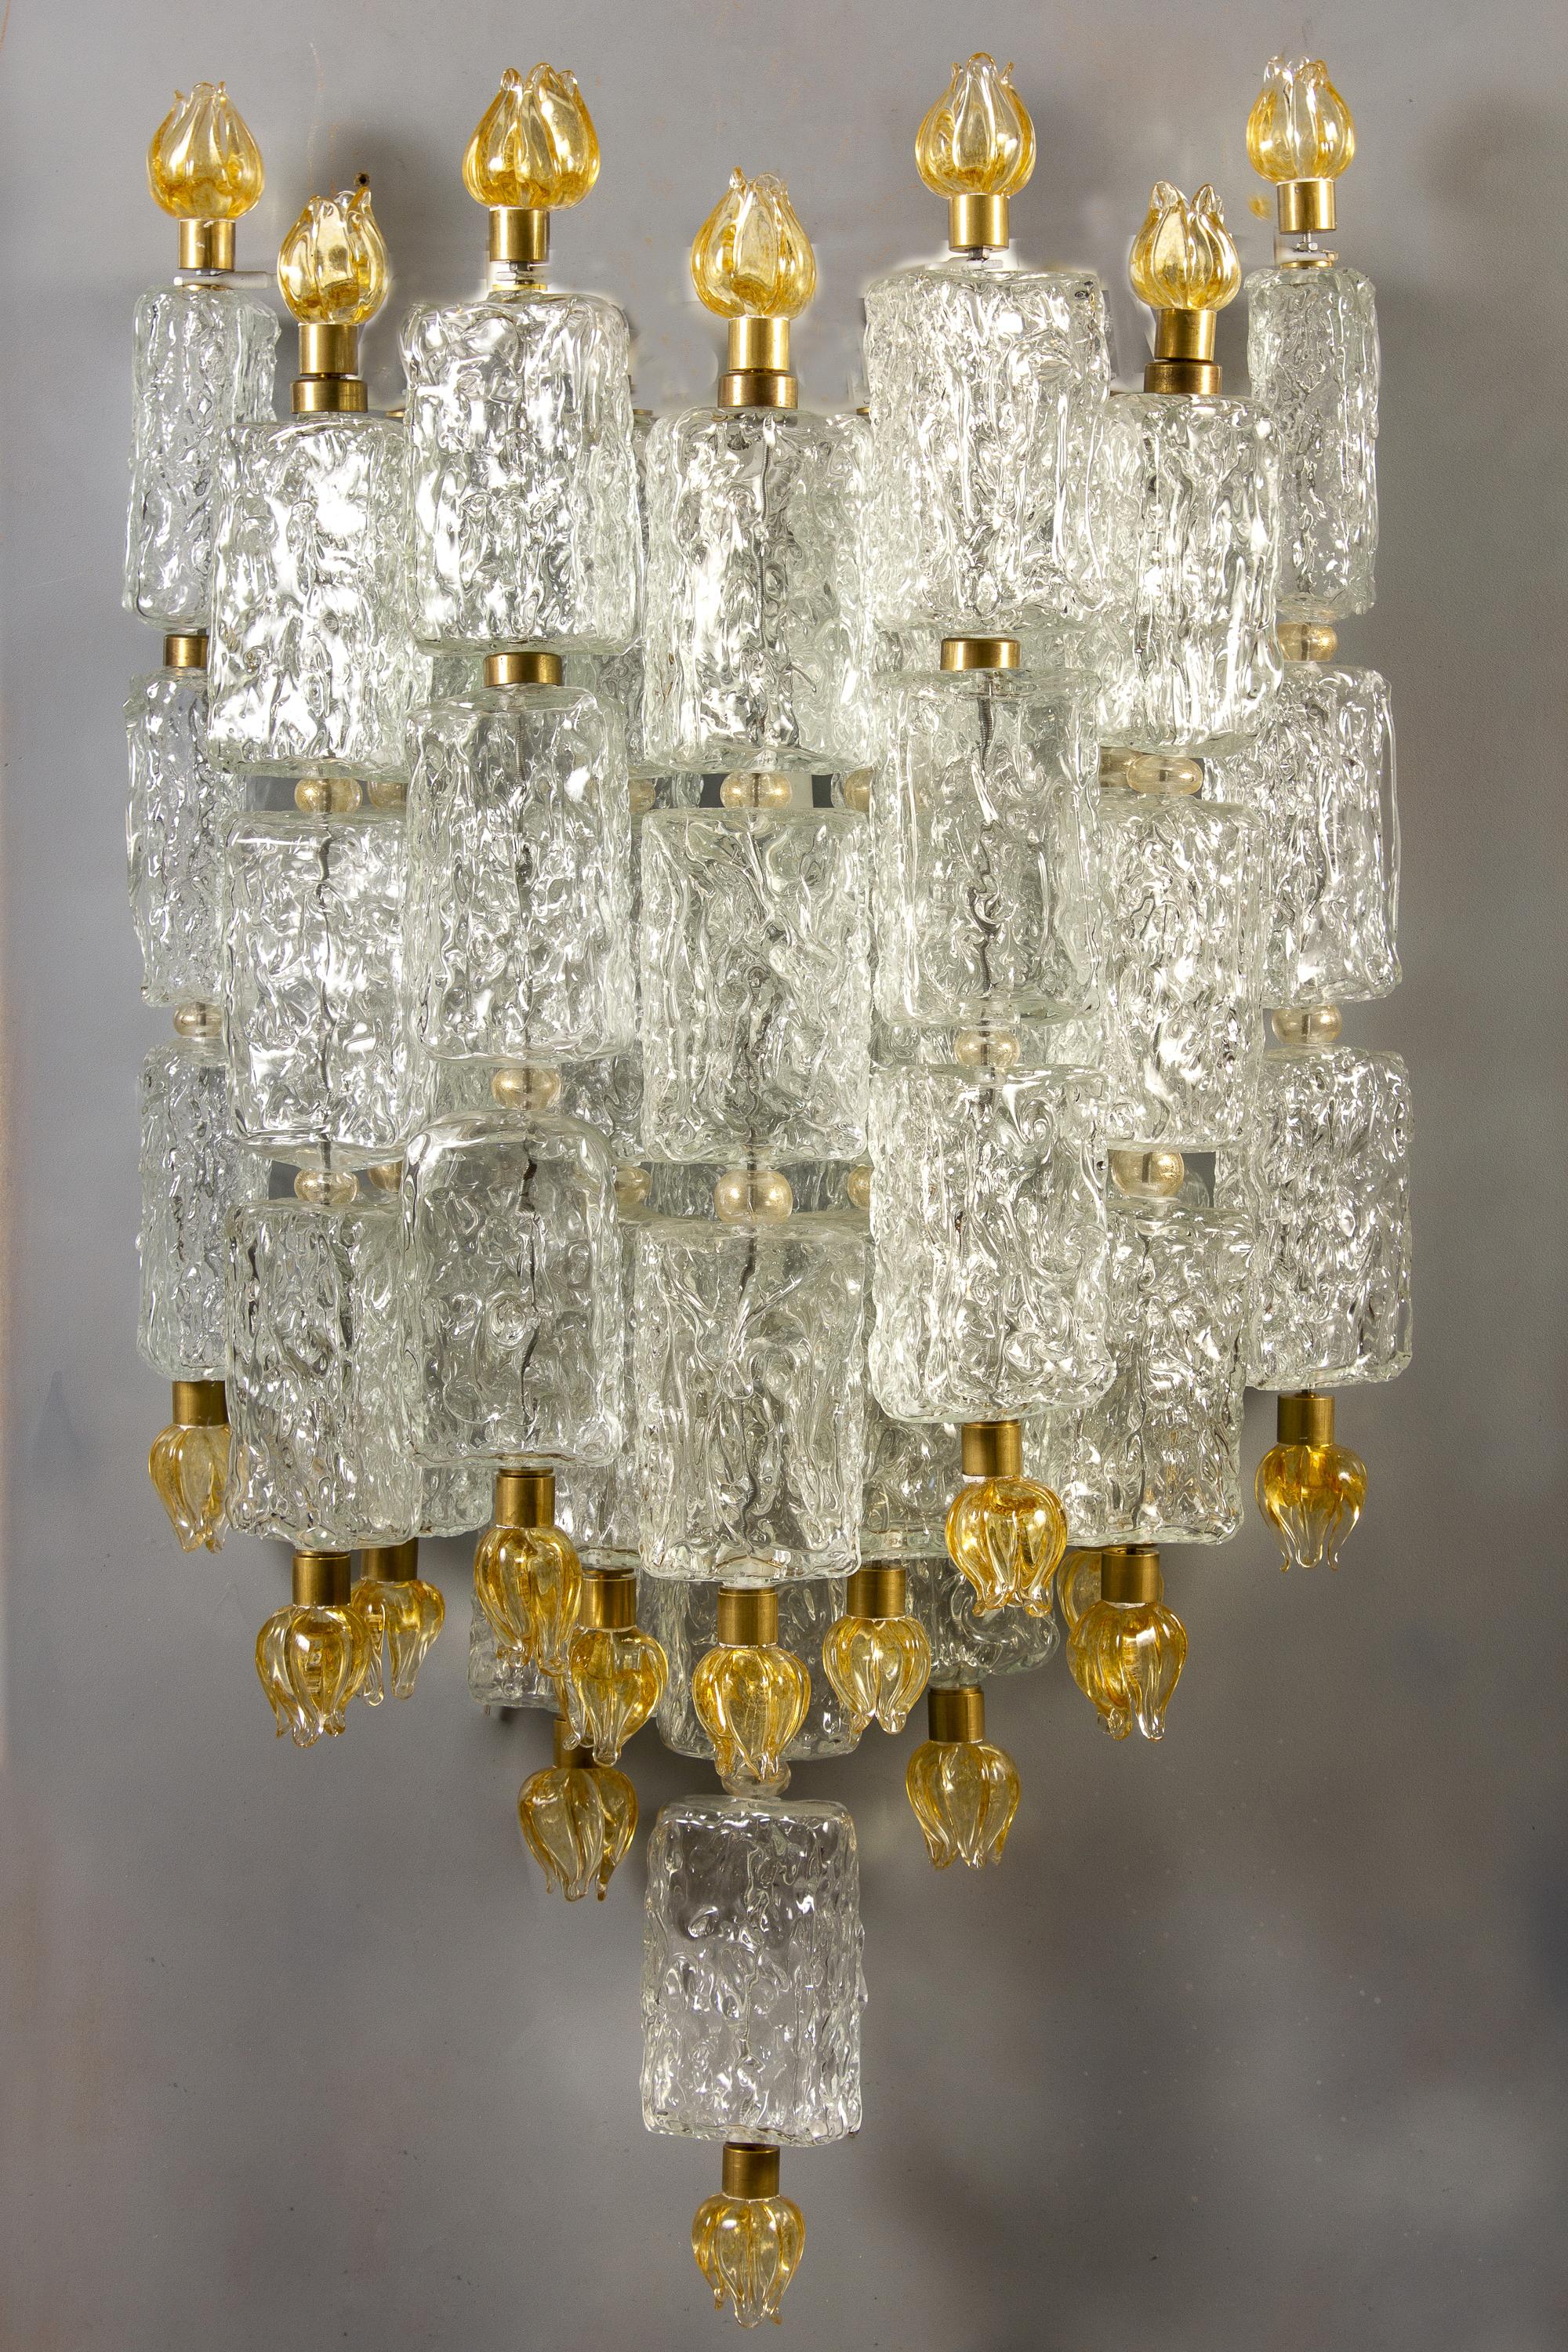 Outstanding pair of Barovier sconces with glass blocks ending and delicious hand blown gold tulips.
We have 2 pairs and available also a magnificent chandelier from the same provenance.
Provenance from a Luxurious Tuscany Hotel.

